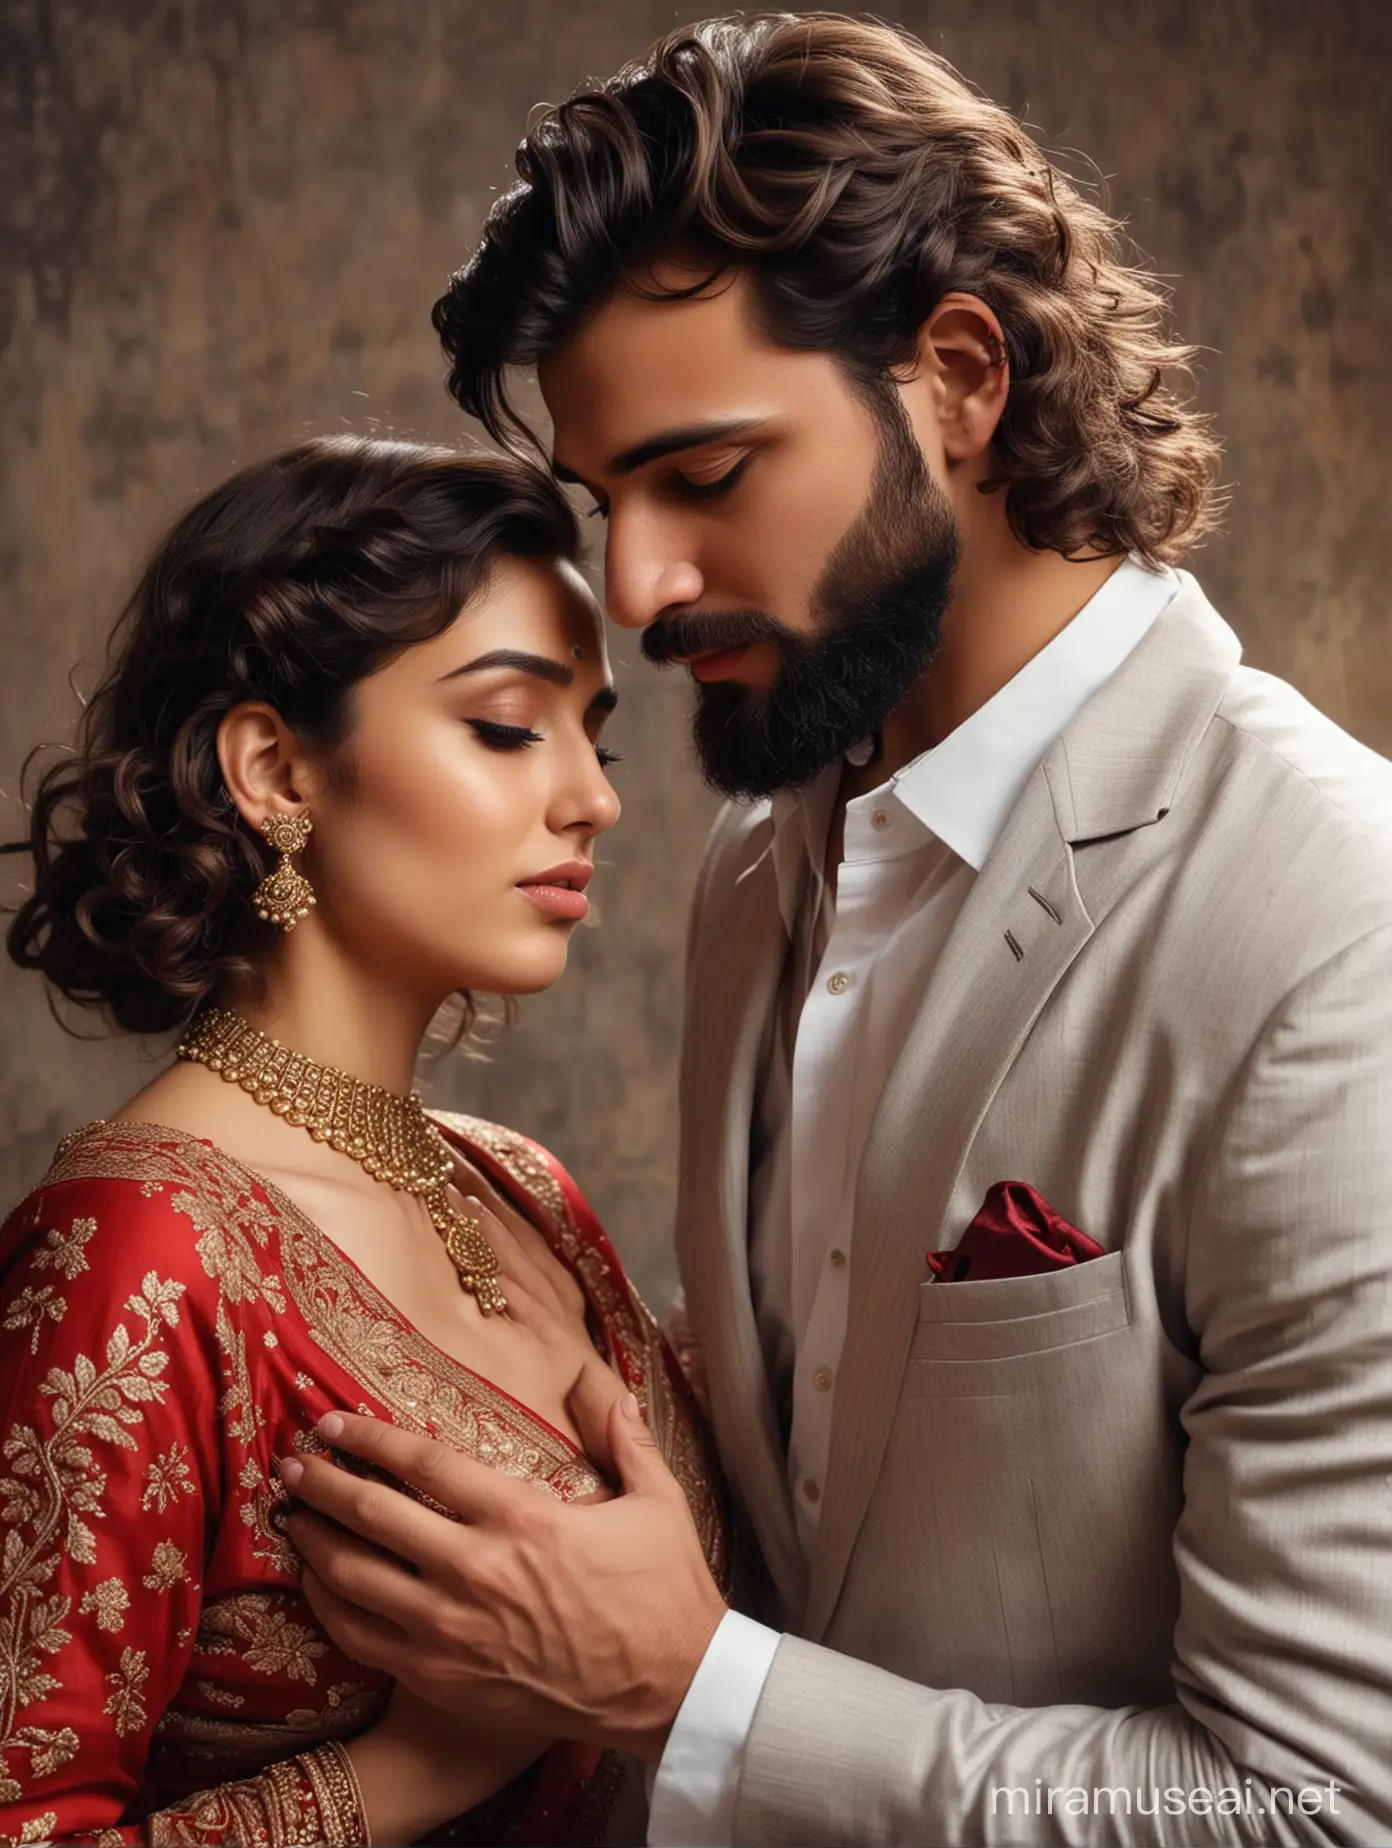 full portrait photo of most beautiful european couple as most beautiful indian couple,  most beautiful cute girl in elegant saree, wide black eyes, full face, girl has long curly hairs, full red dot,  hair falling on breasts, full makeup, bridal makeup, full jewelry, hair ornaments, blouse low cut, girl embracing man and resting forehead on chest of man with deep emotion and ecstasy, man comforting girl,  man with stylish beard and perfect short hair cut, suit, photo realistic, 4k.